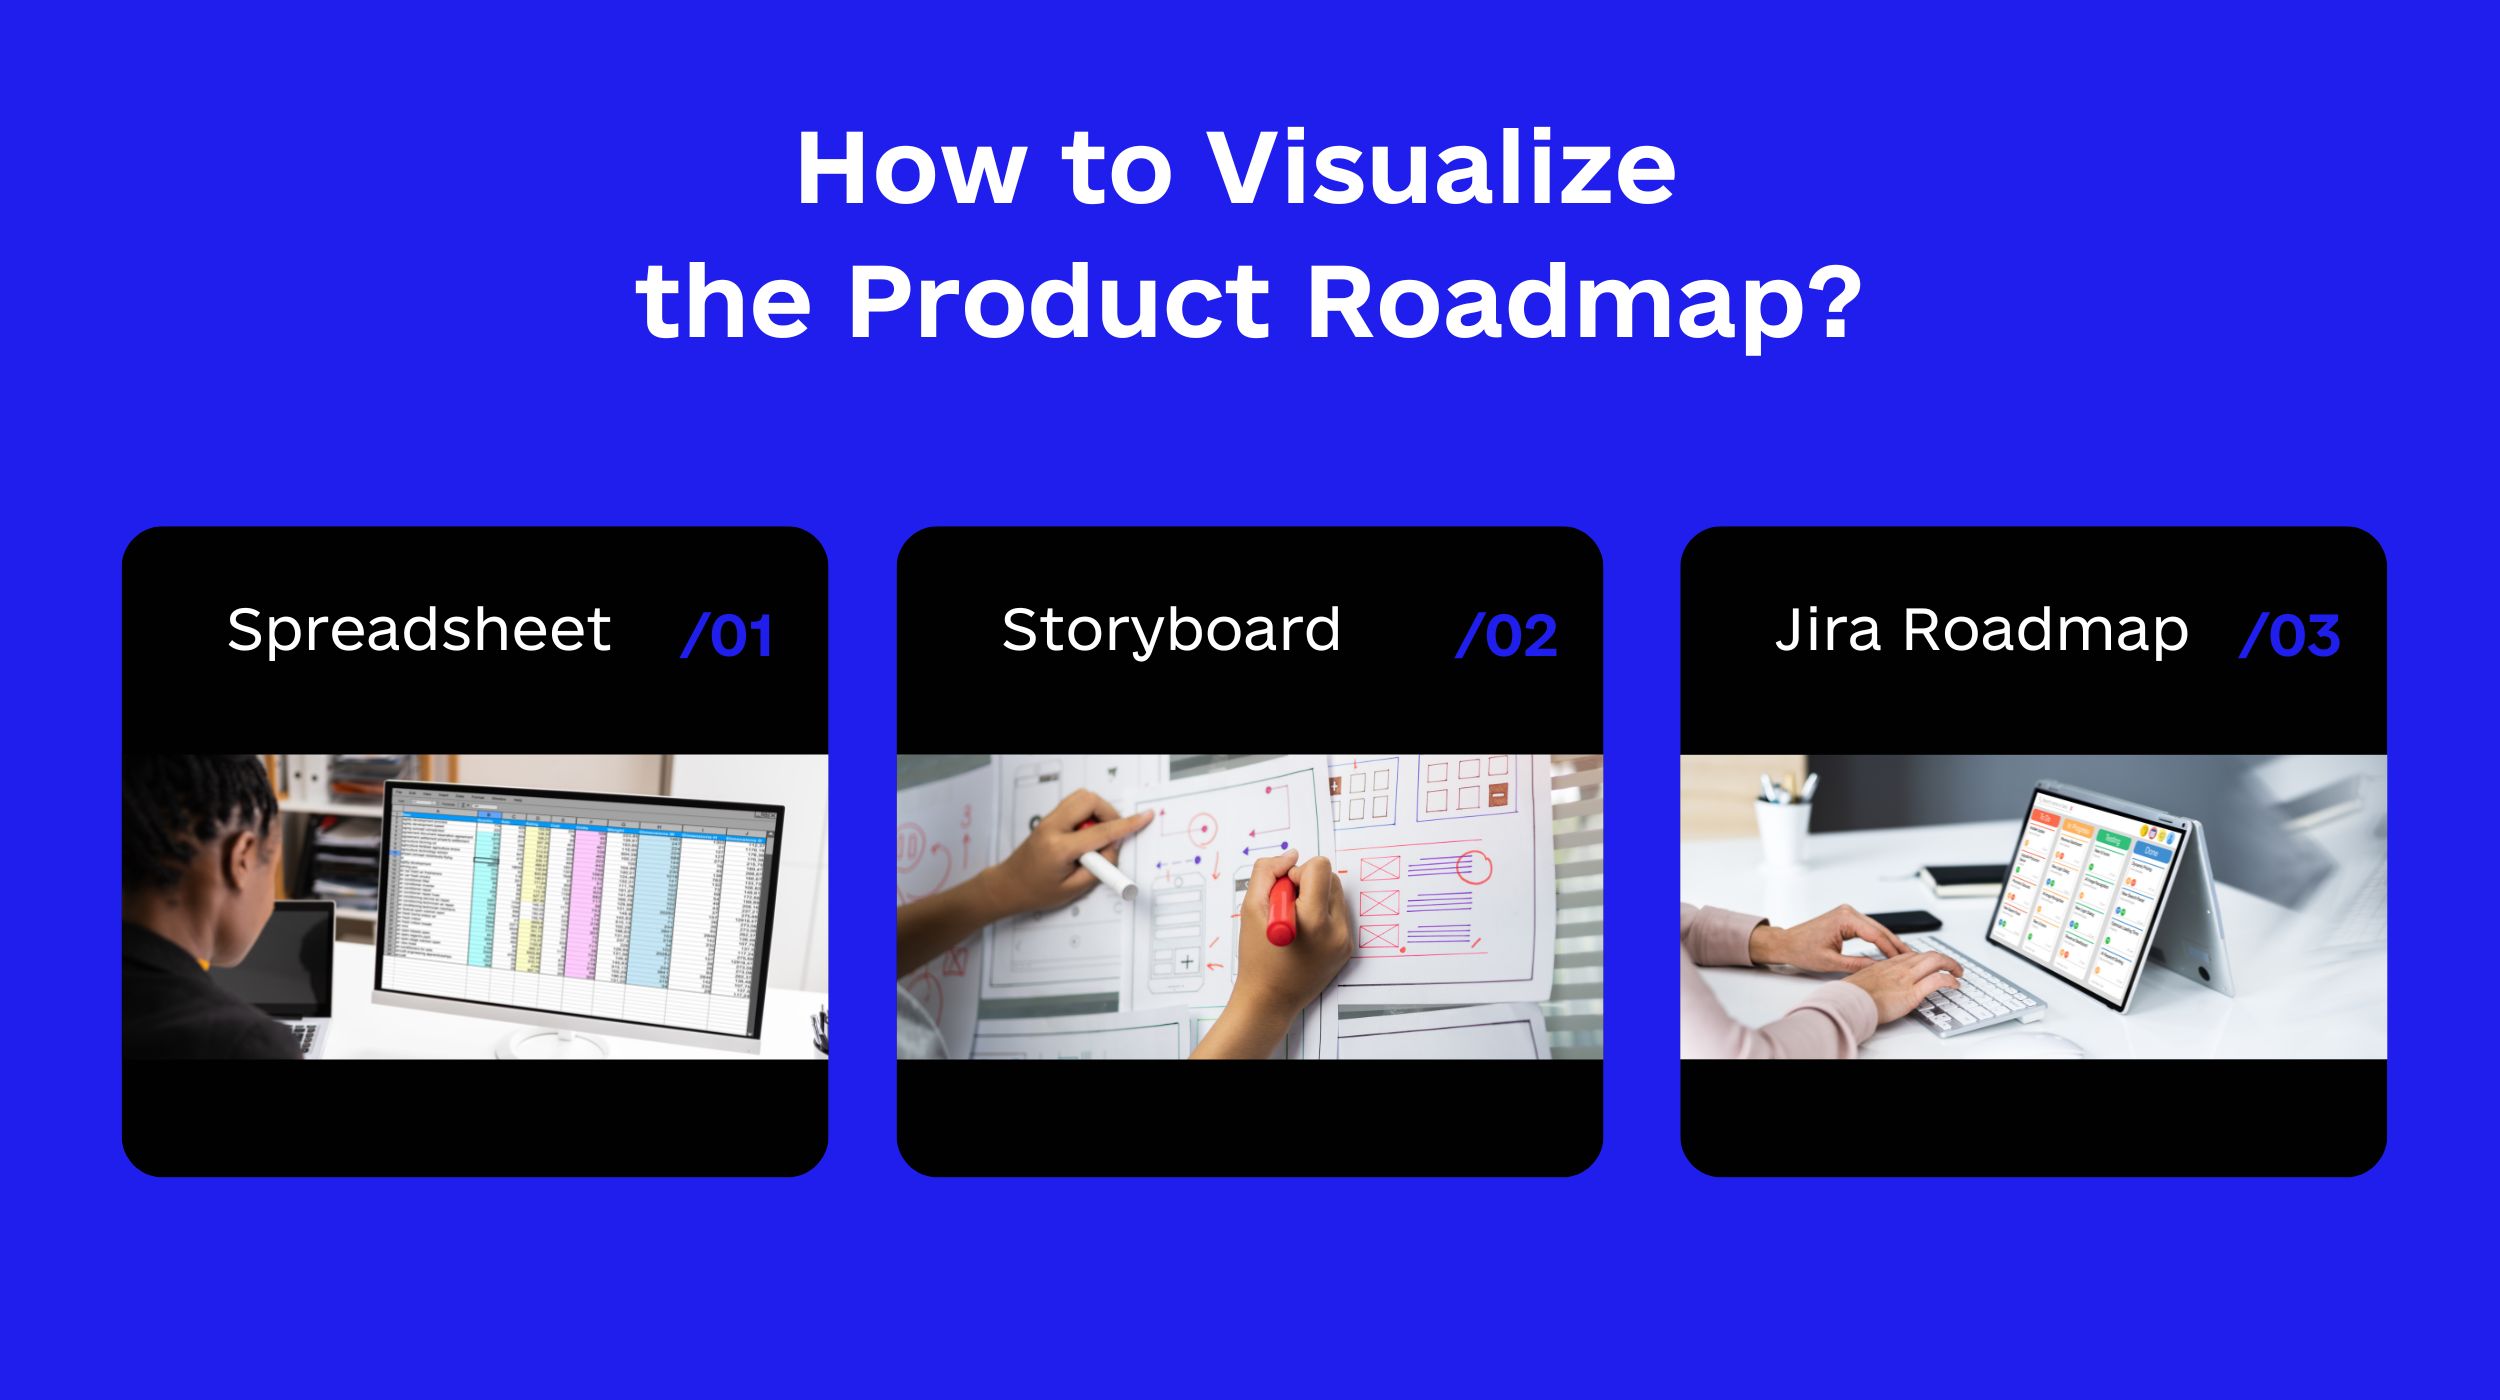 How to Visualize the Product Roadmap?